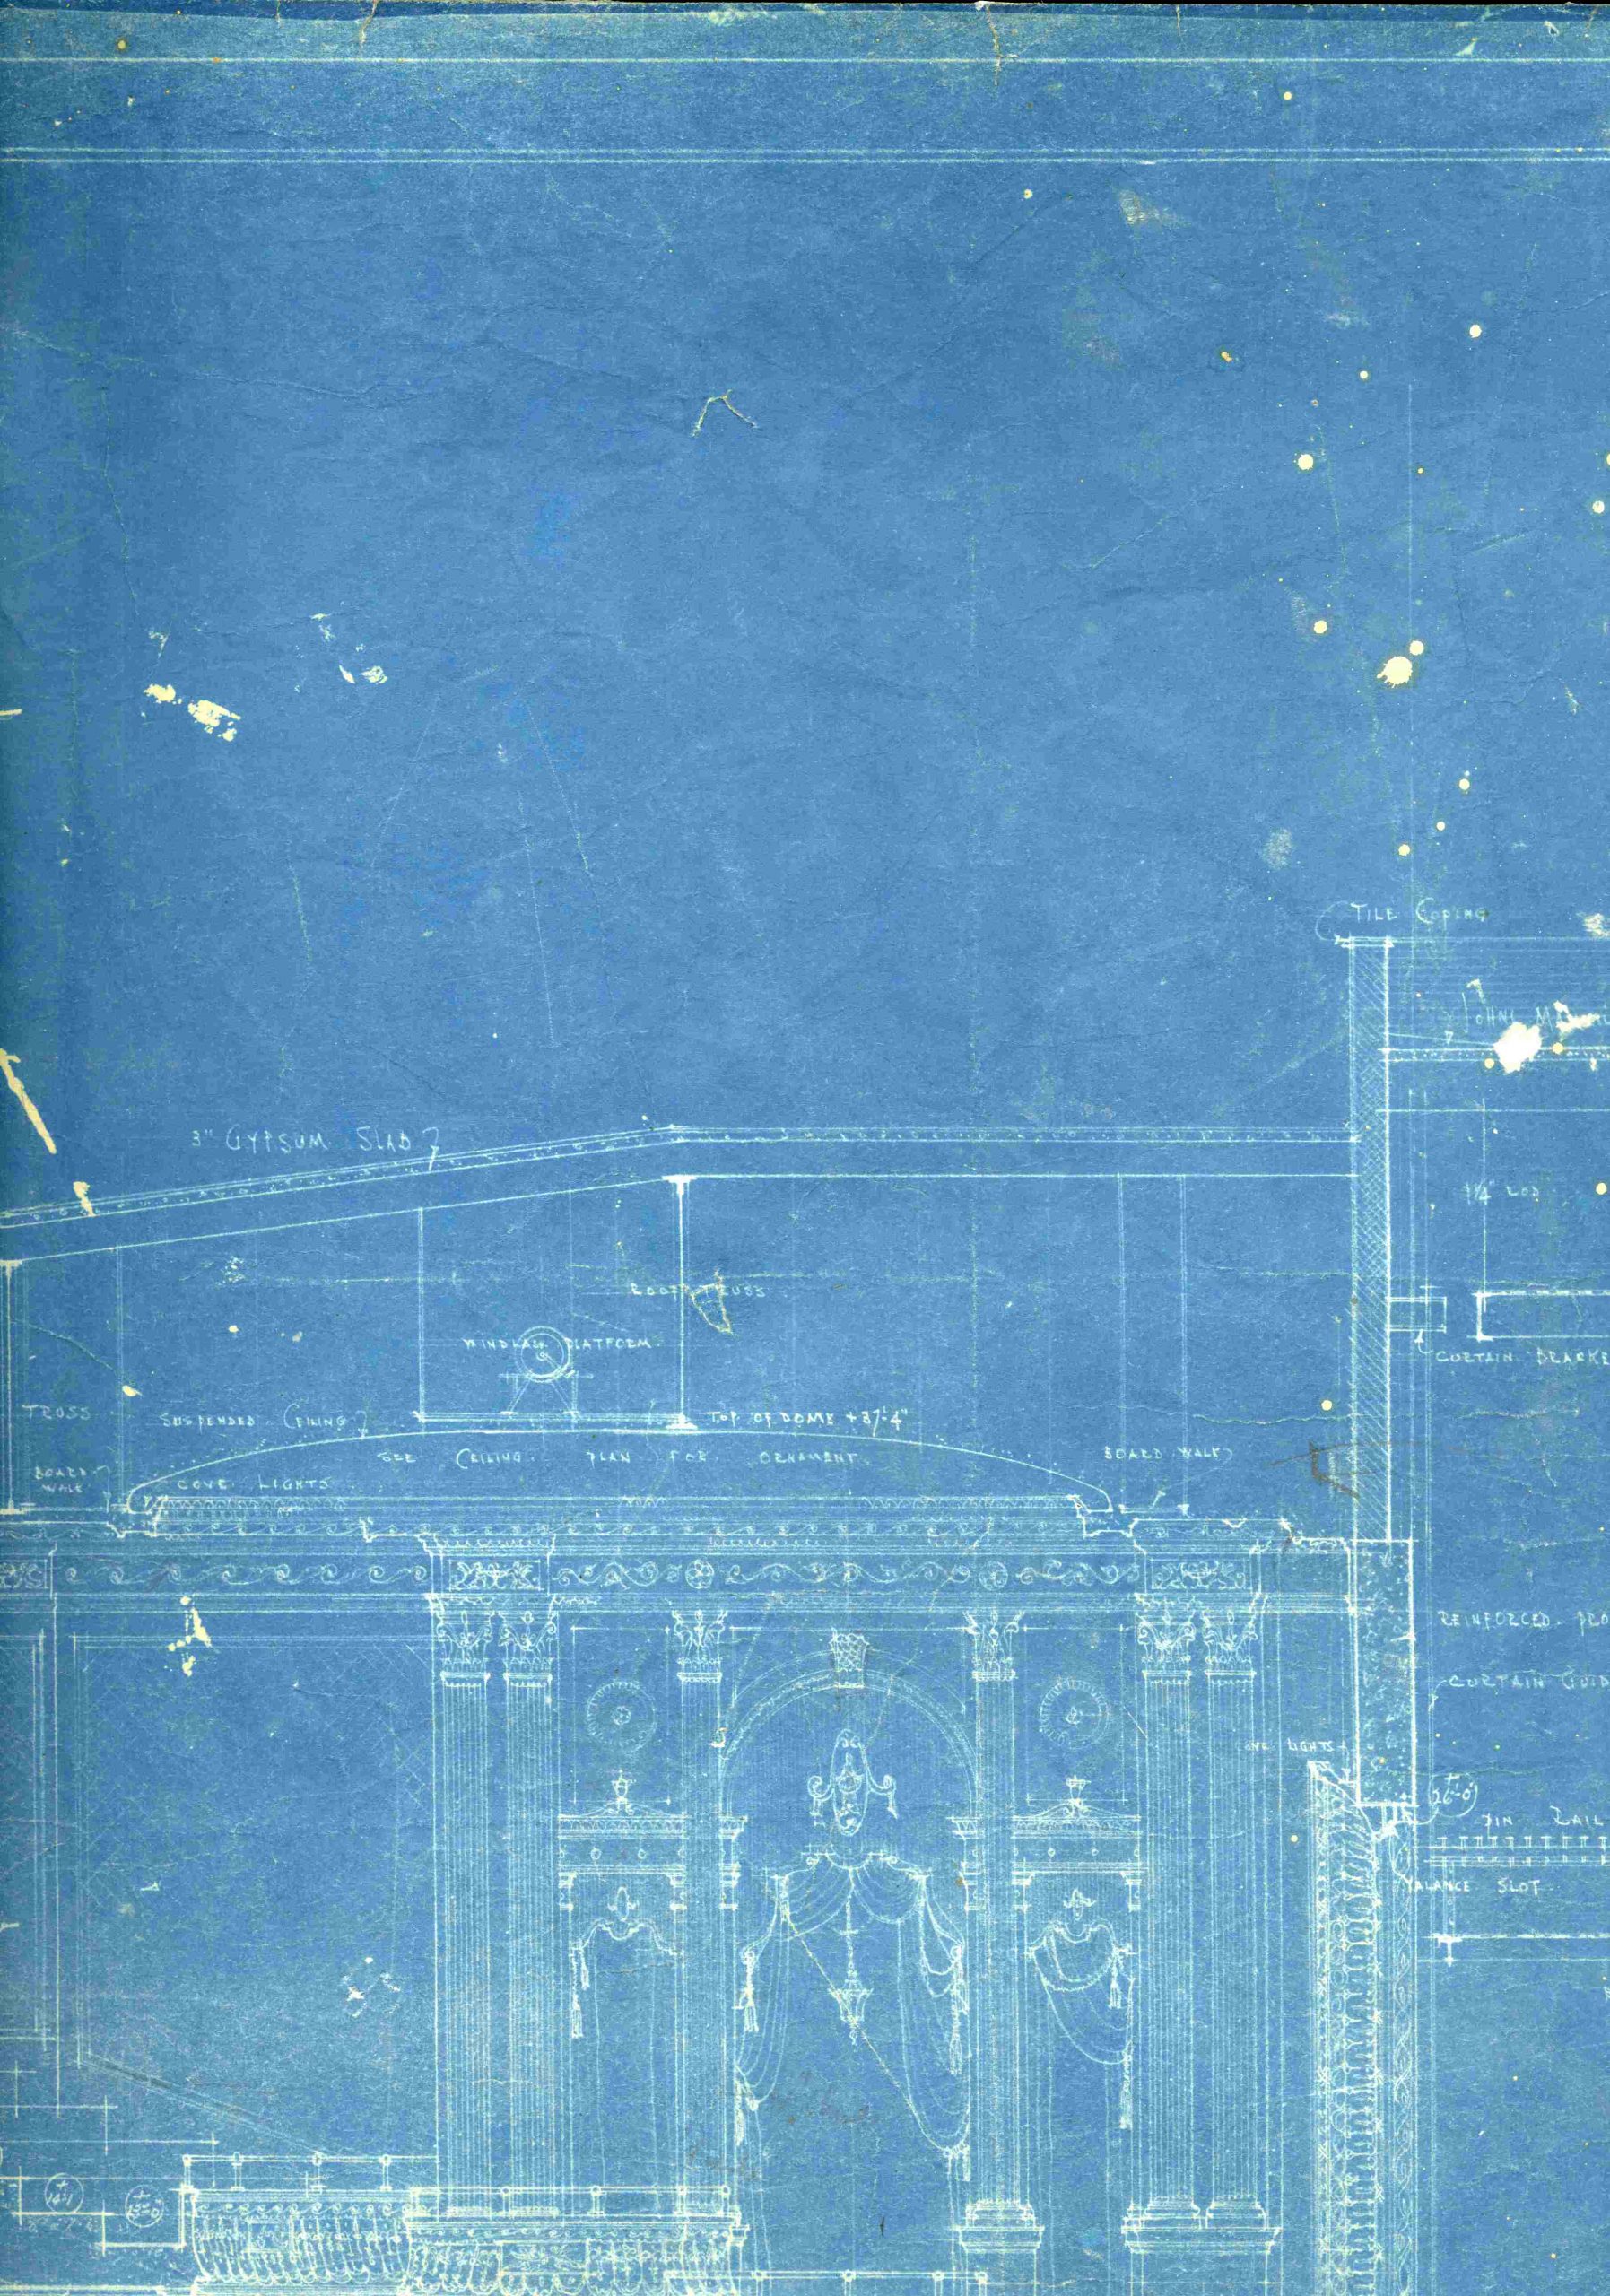 Architectural drawing by John MacNee Jeffrey of the Standard Theatre from 1921 - 1922. These drawings are the original permit plans that would have been used onsite during construction. Although J.M. Jeffrey is the name on the drawings, Benjamin Brown has also been credited as the architect for the theatre according to a 31 August 1922 Globe and Mail article describing the opening night.

OJA, fonds 49, series 3, file 104.
